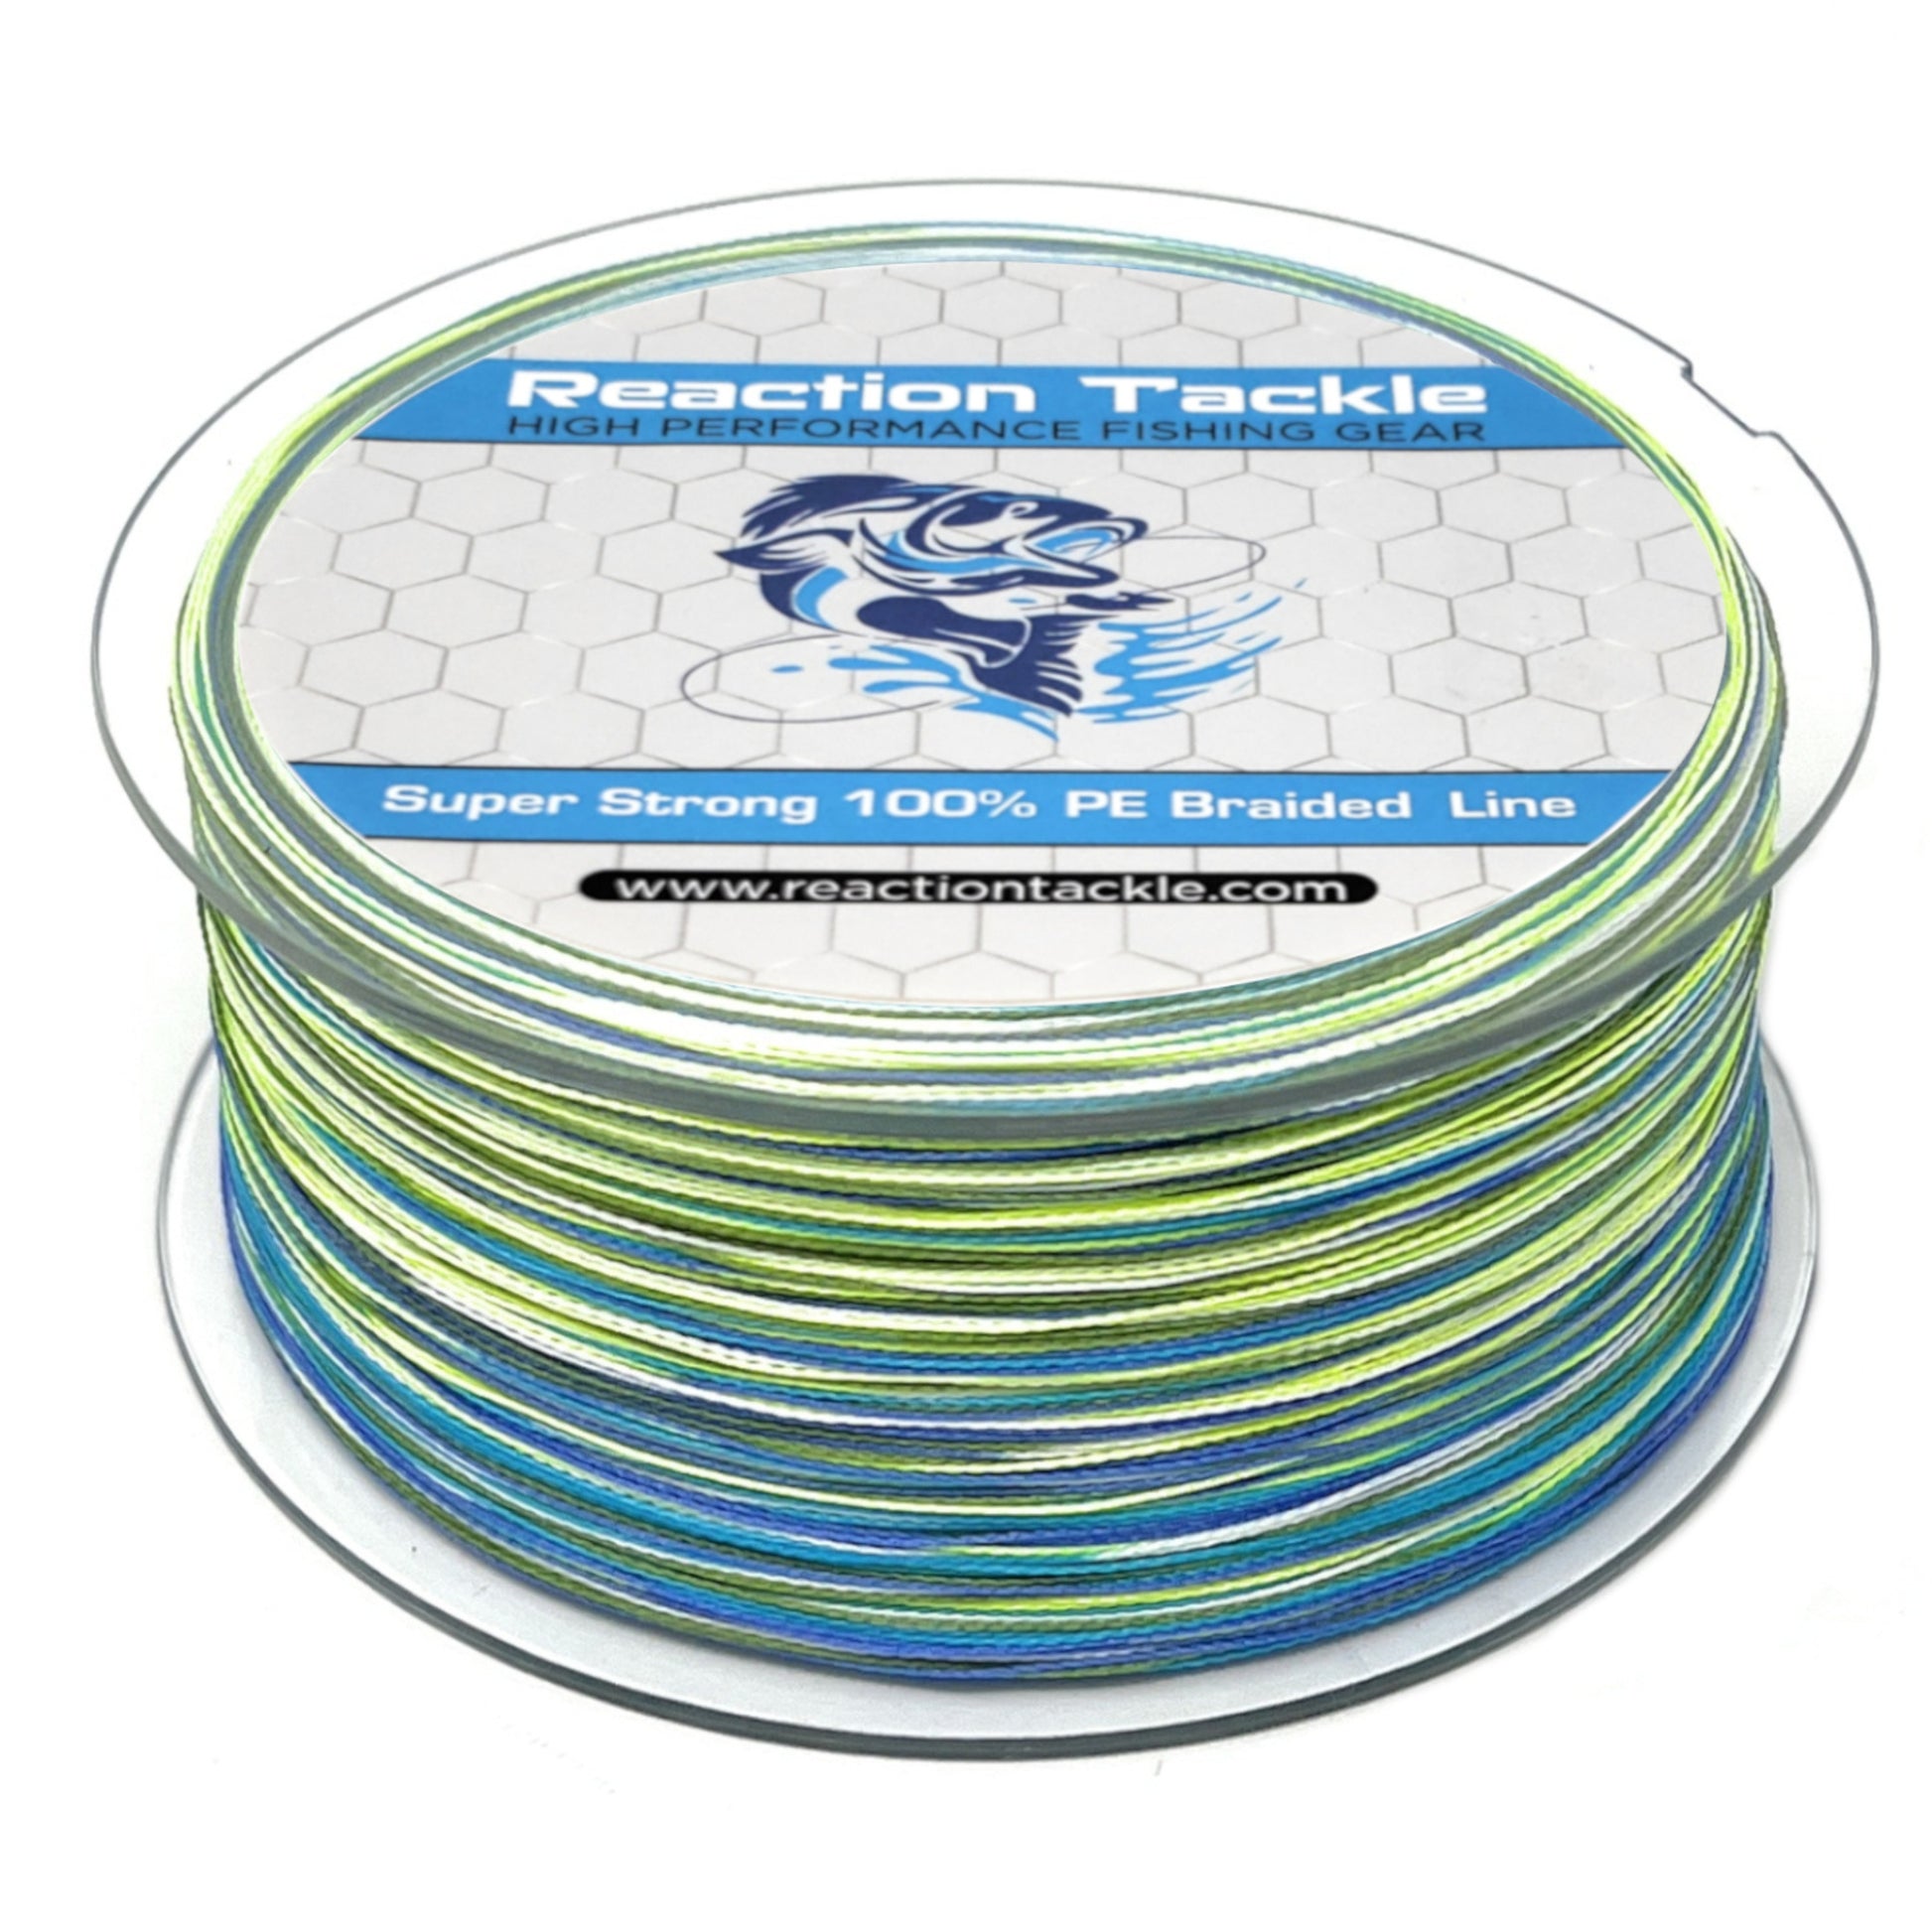 Reaction Tackle Sea Blue 65lb 1000yd, Size: 65 lbs